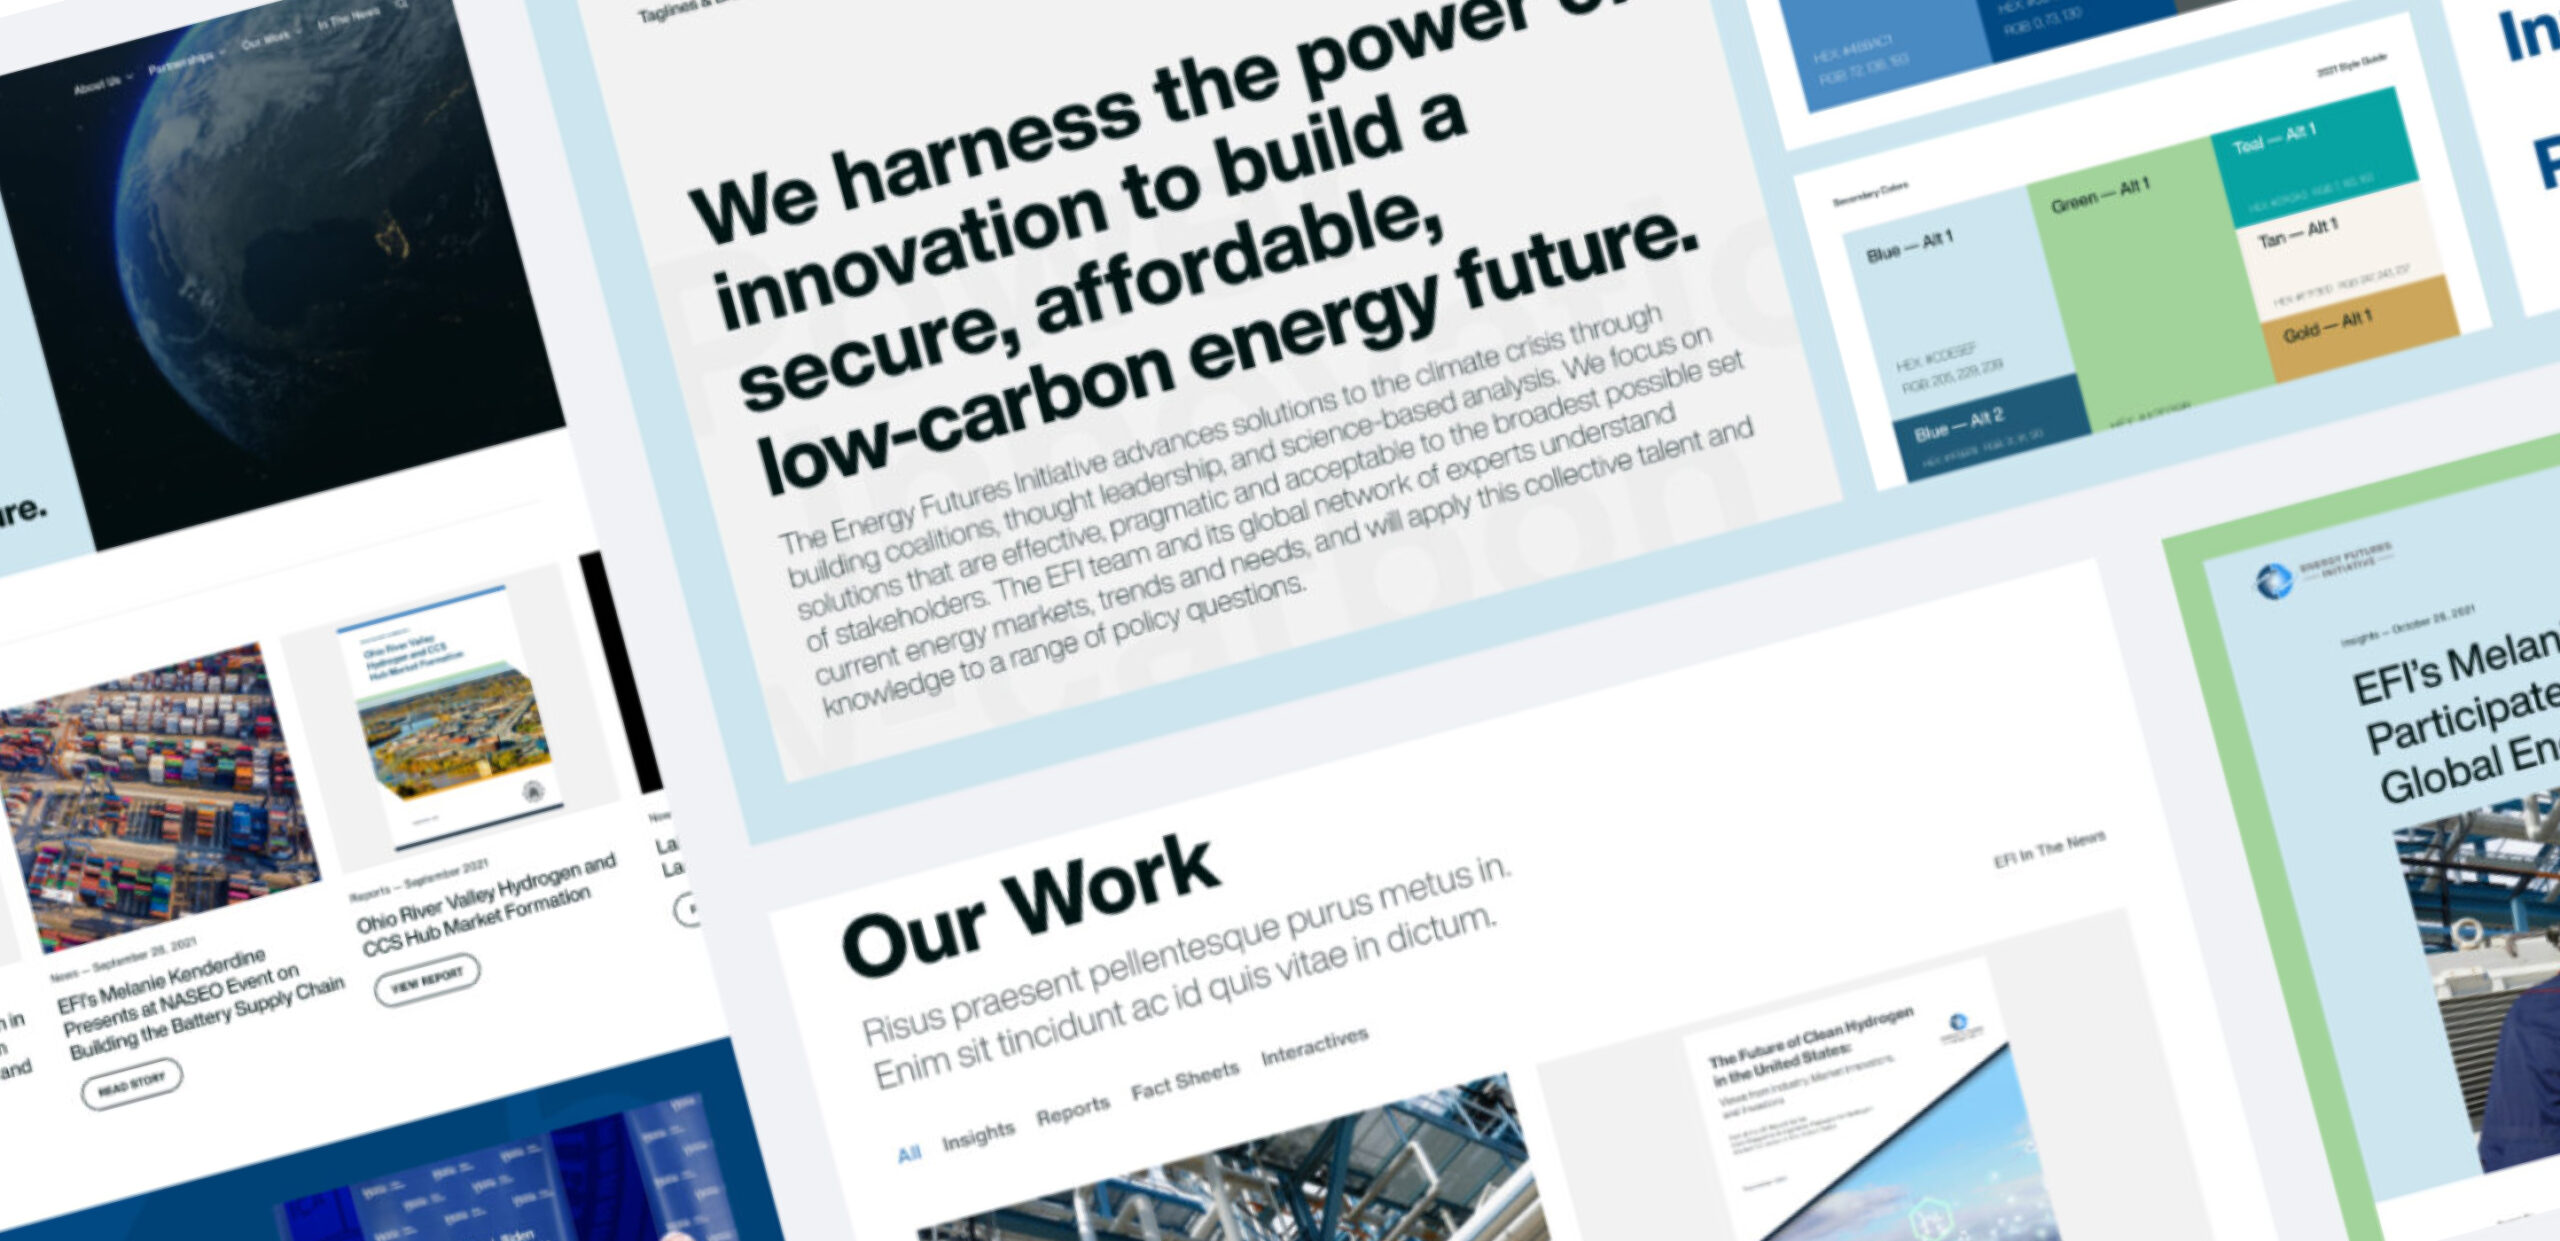 Samples interface work from the Energy Future Initiatives WordPress website.